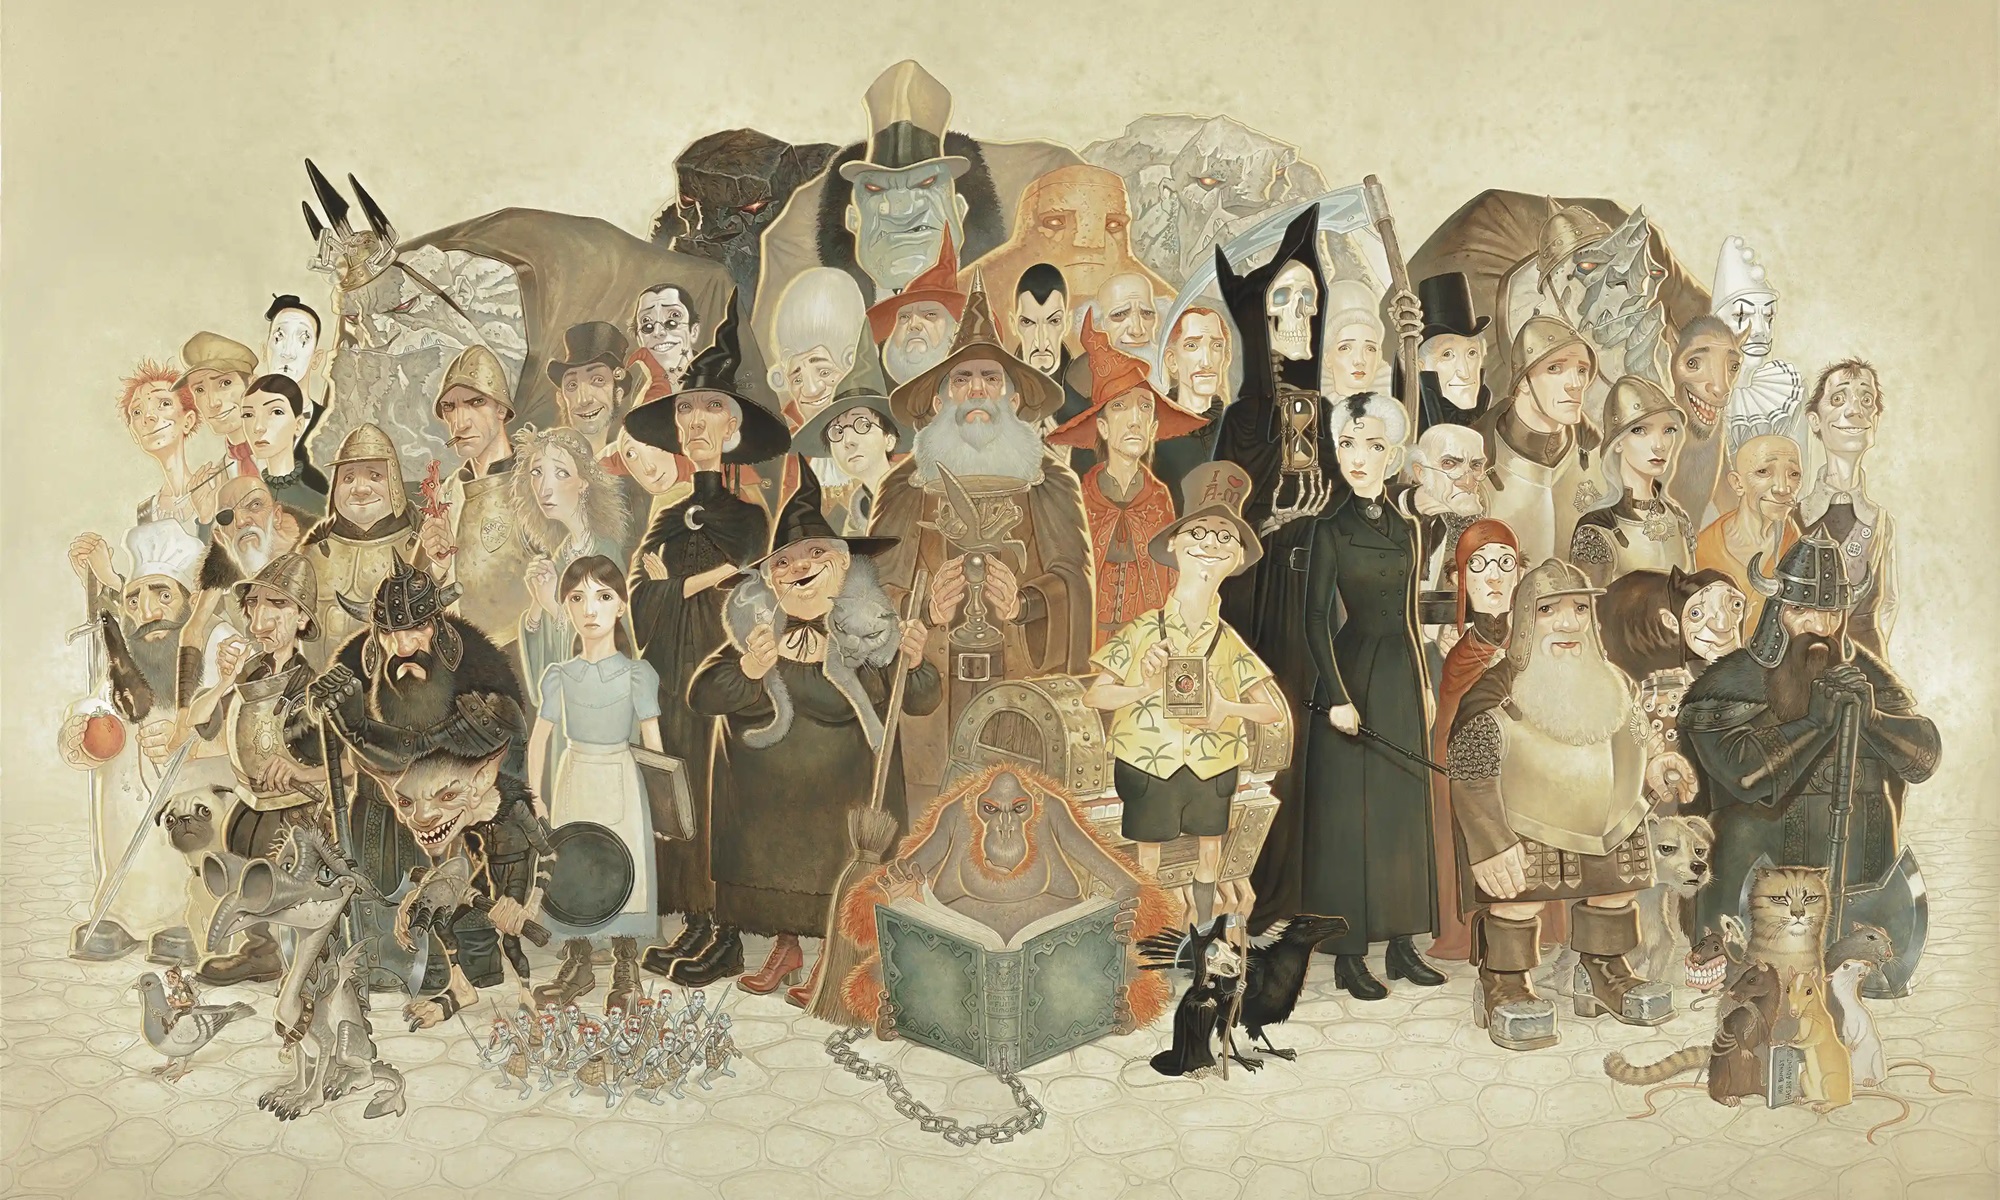 An illustration of around 50 Discworld characters